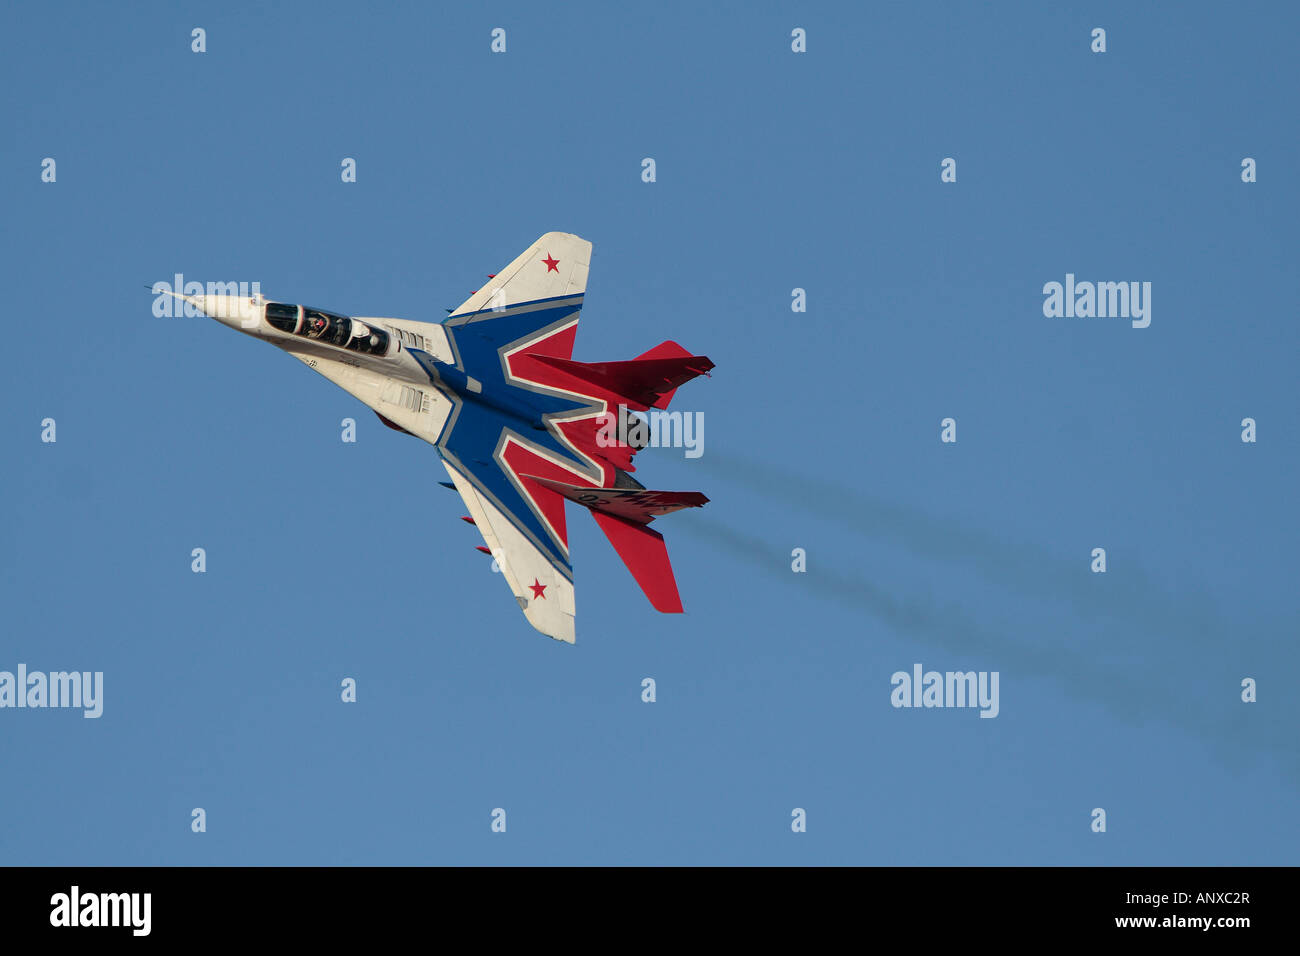 MIG 29 Fulcrum of the Russian Air Force performing at the Al Ain airshow United Arab Emirates 2007 Stock Photo